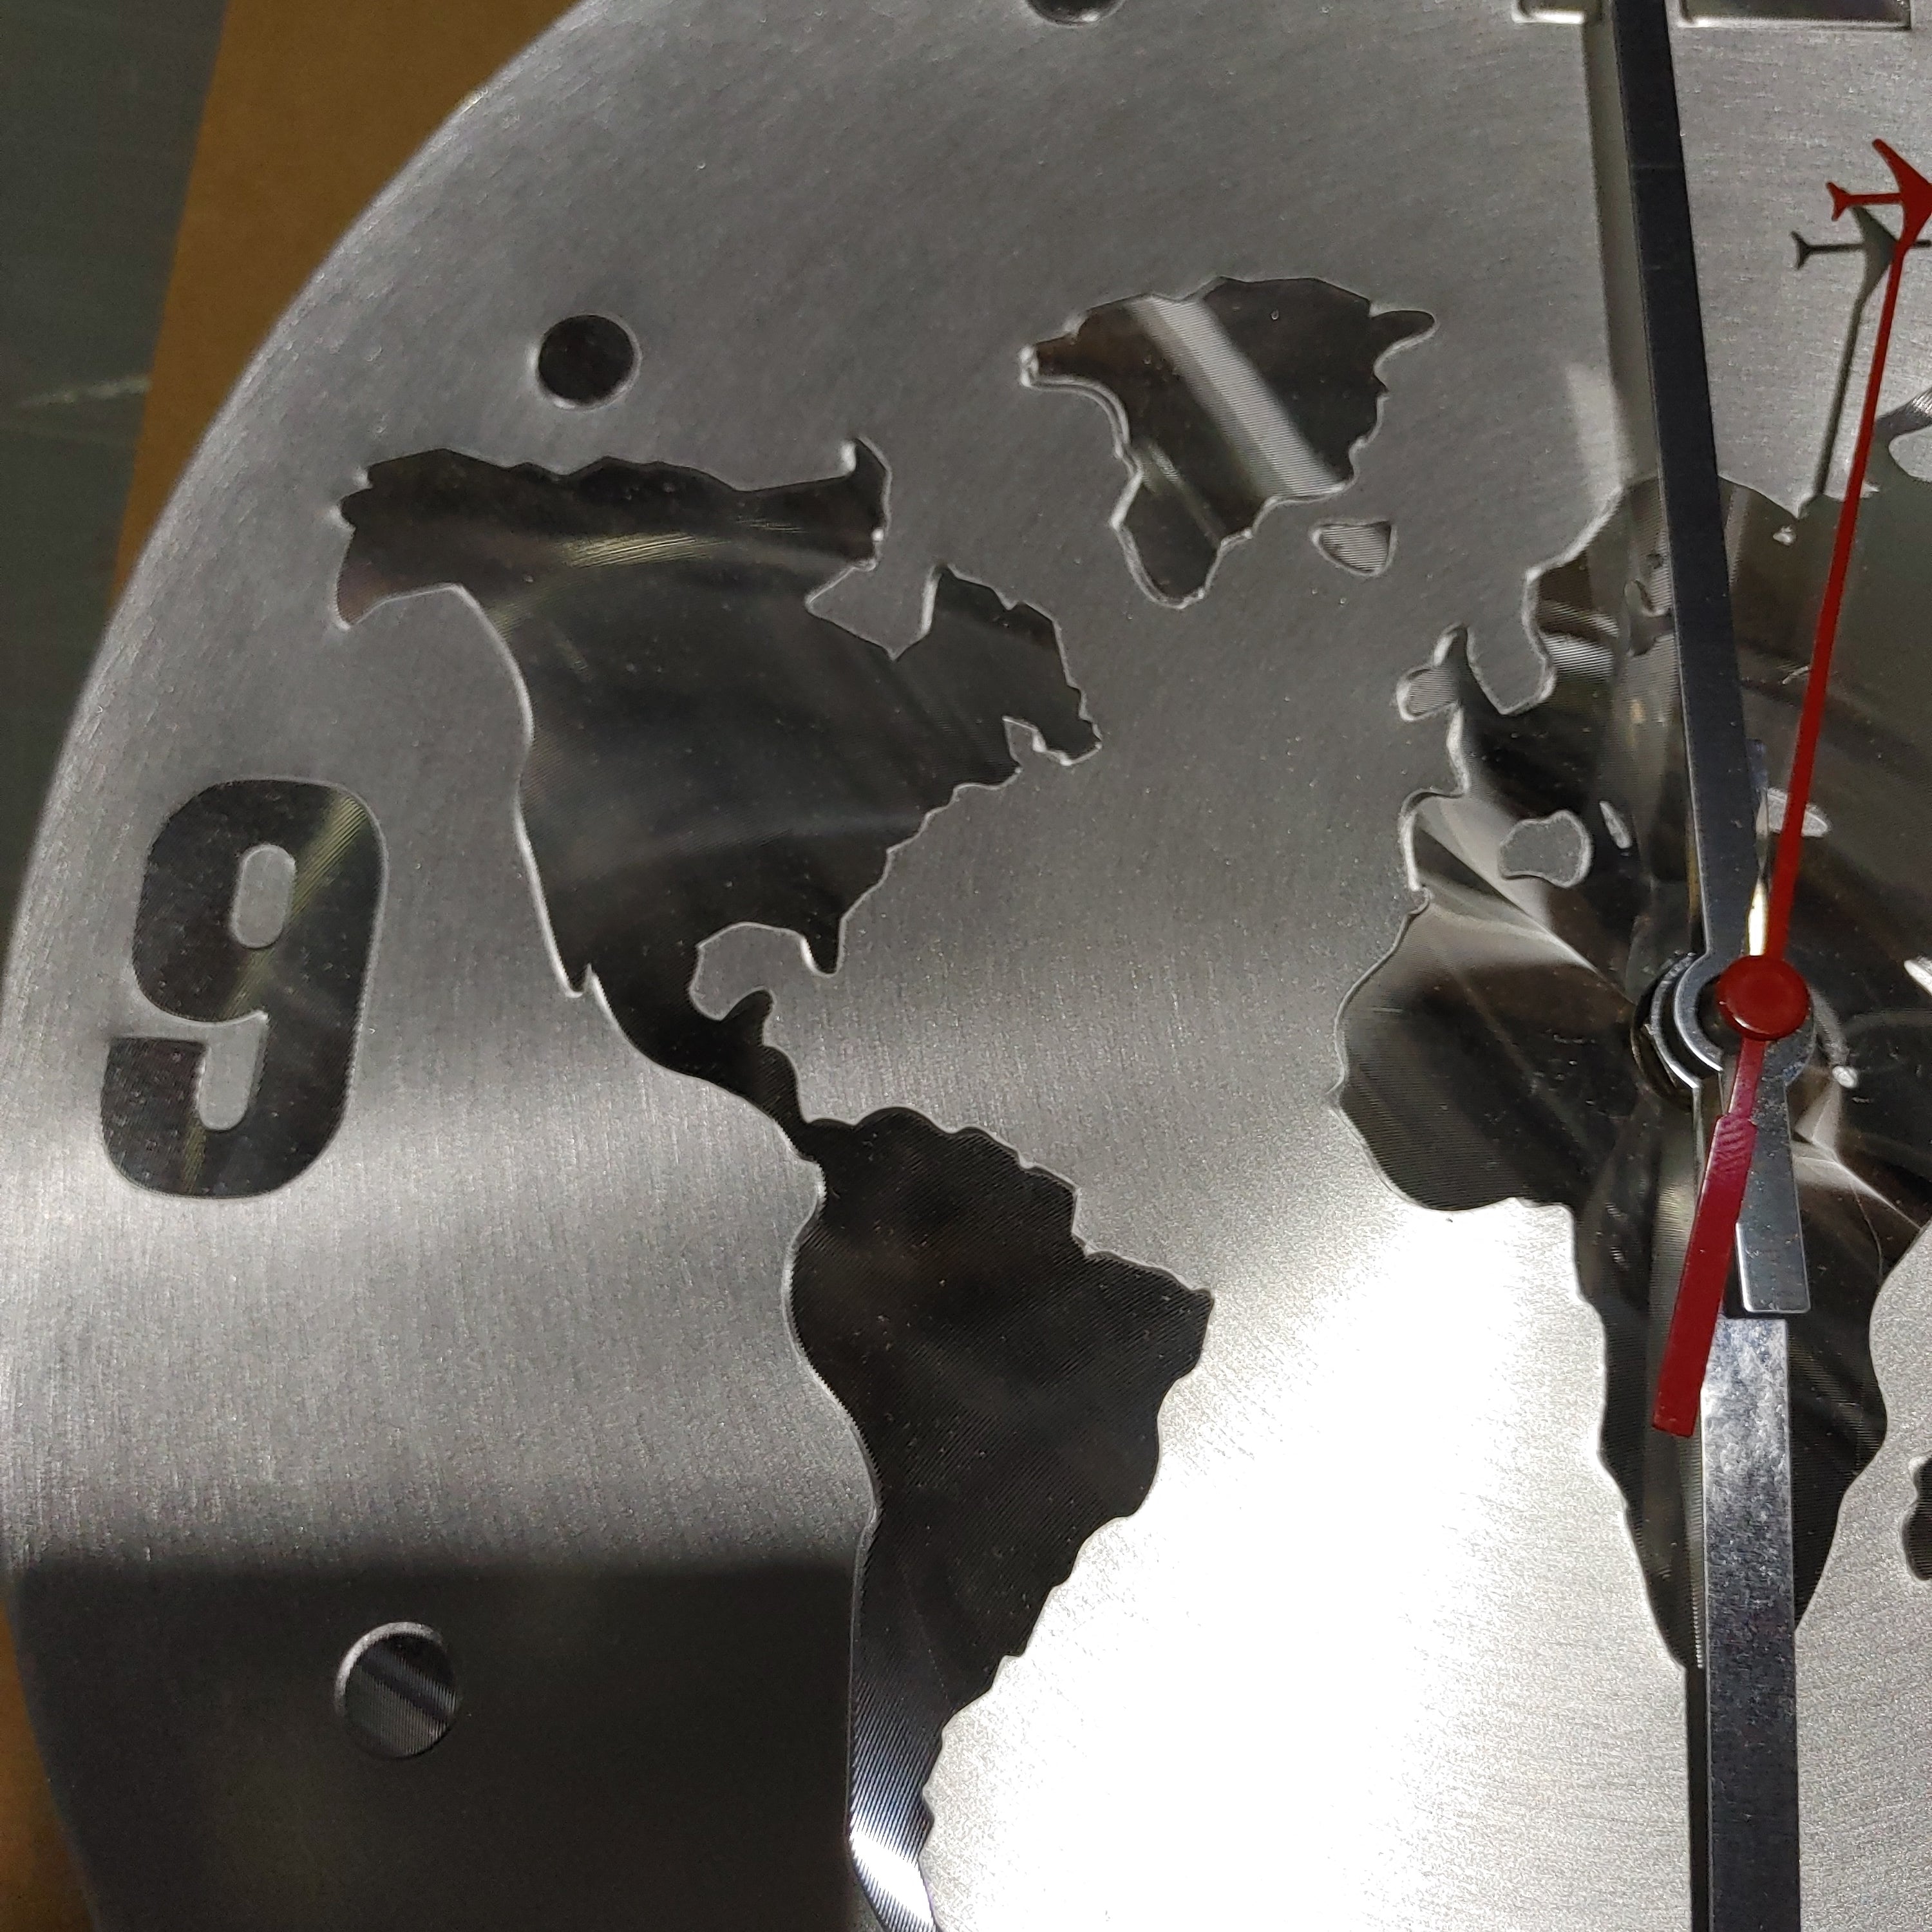 Wall clock metal world with continents and red airplane on hand